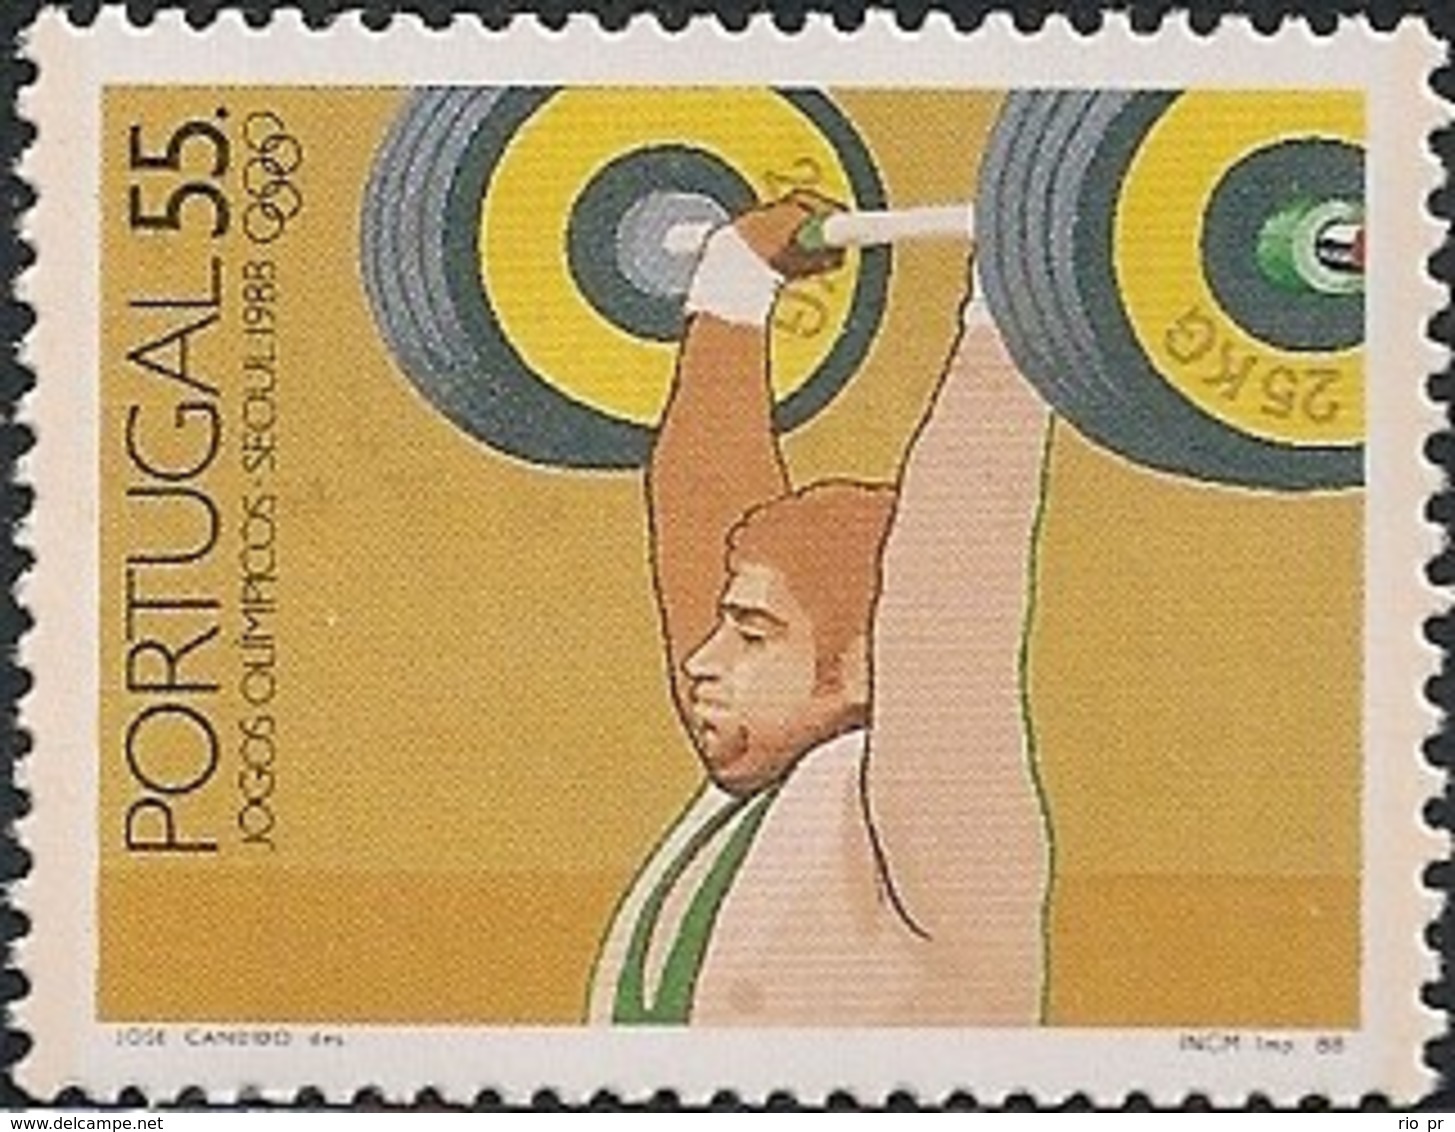 PORTUGAL - SEOUL'88 SUMMER OLYMPIC GAMES (WEIGHTLIFTING) 1988 - MNH - Estate 1988: Seul